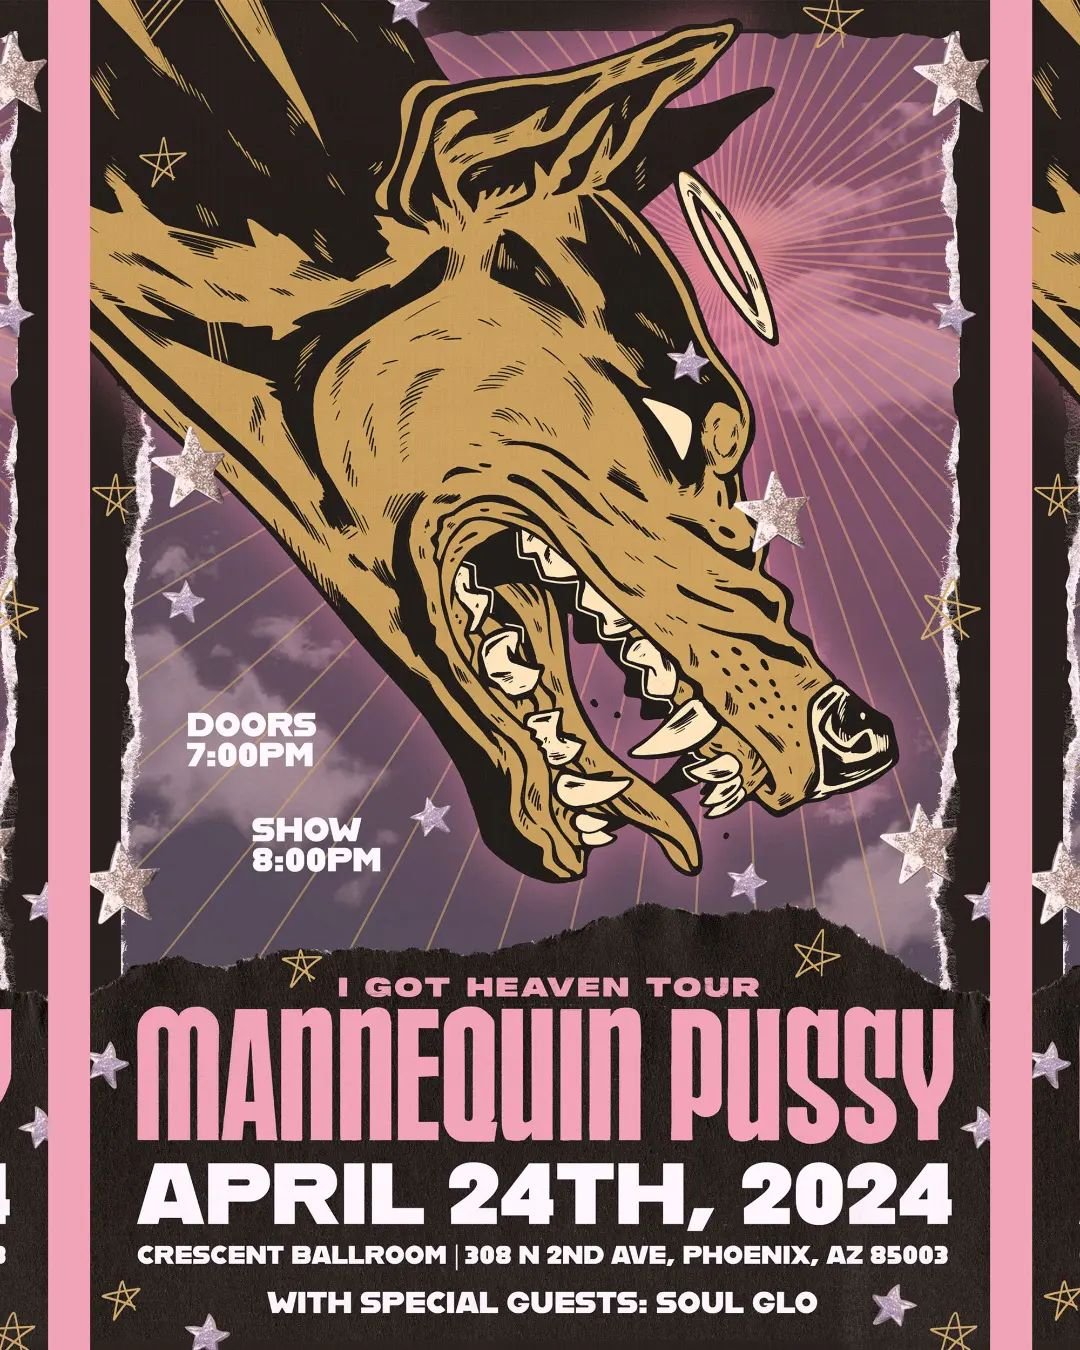 Next installment in my personal art challenge for 2024. Creating a poster for every concert I attend, this time featuring @mannequinpussy. Their show in Phoenix @crescentphx was absolutely sick and I'm stoked I finally got the chance to see them live